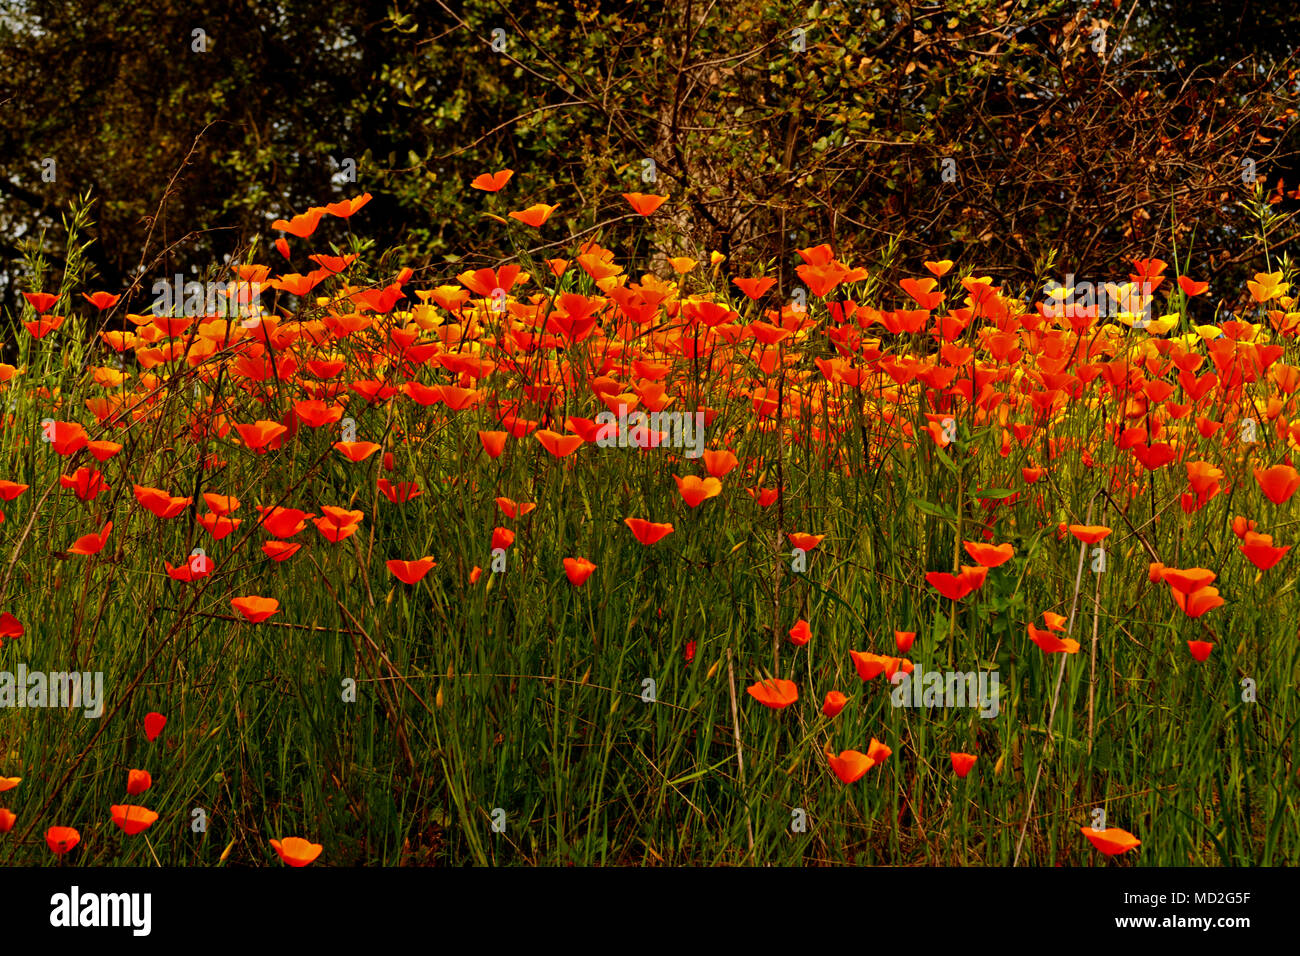 Poppies Electra Road, Californie Banque D'Images